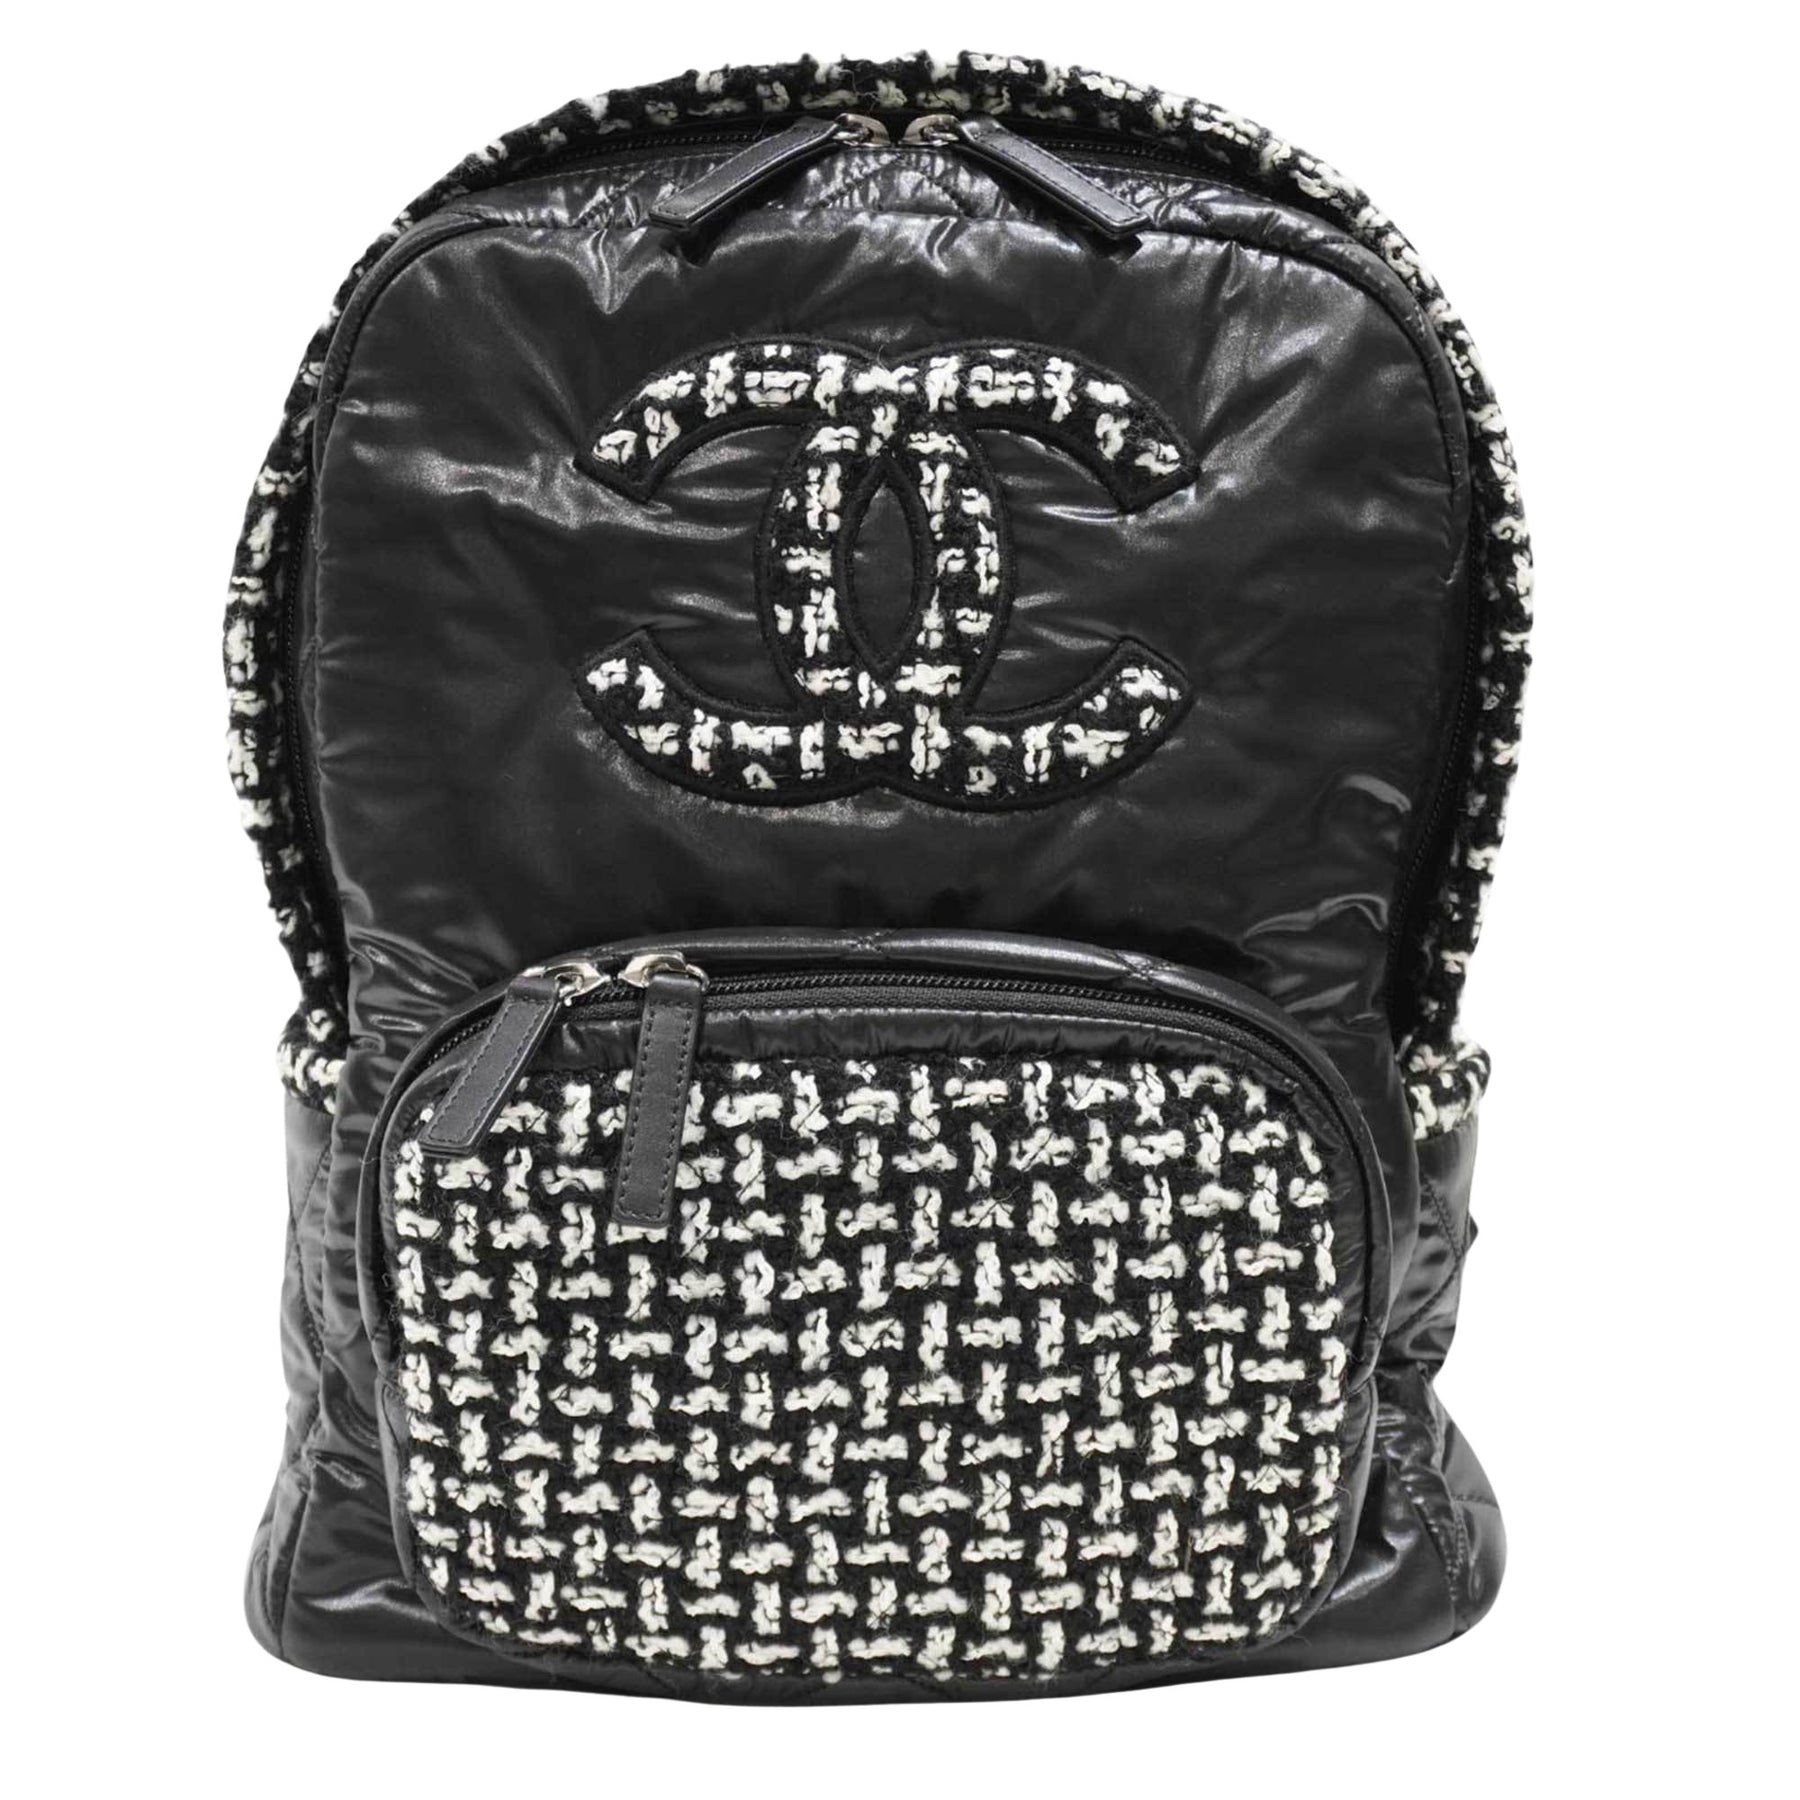 Chanel Synthetic Backpack Bag (Pre-Owned) - Black